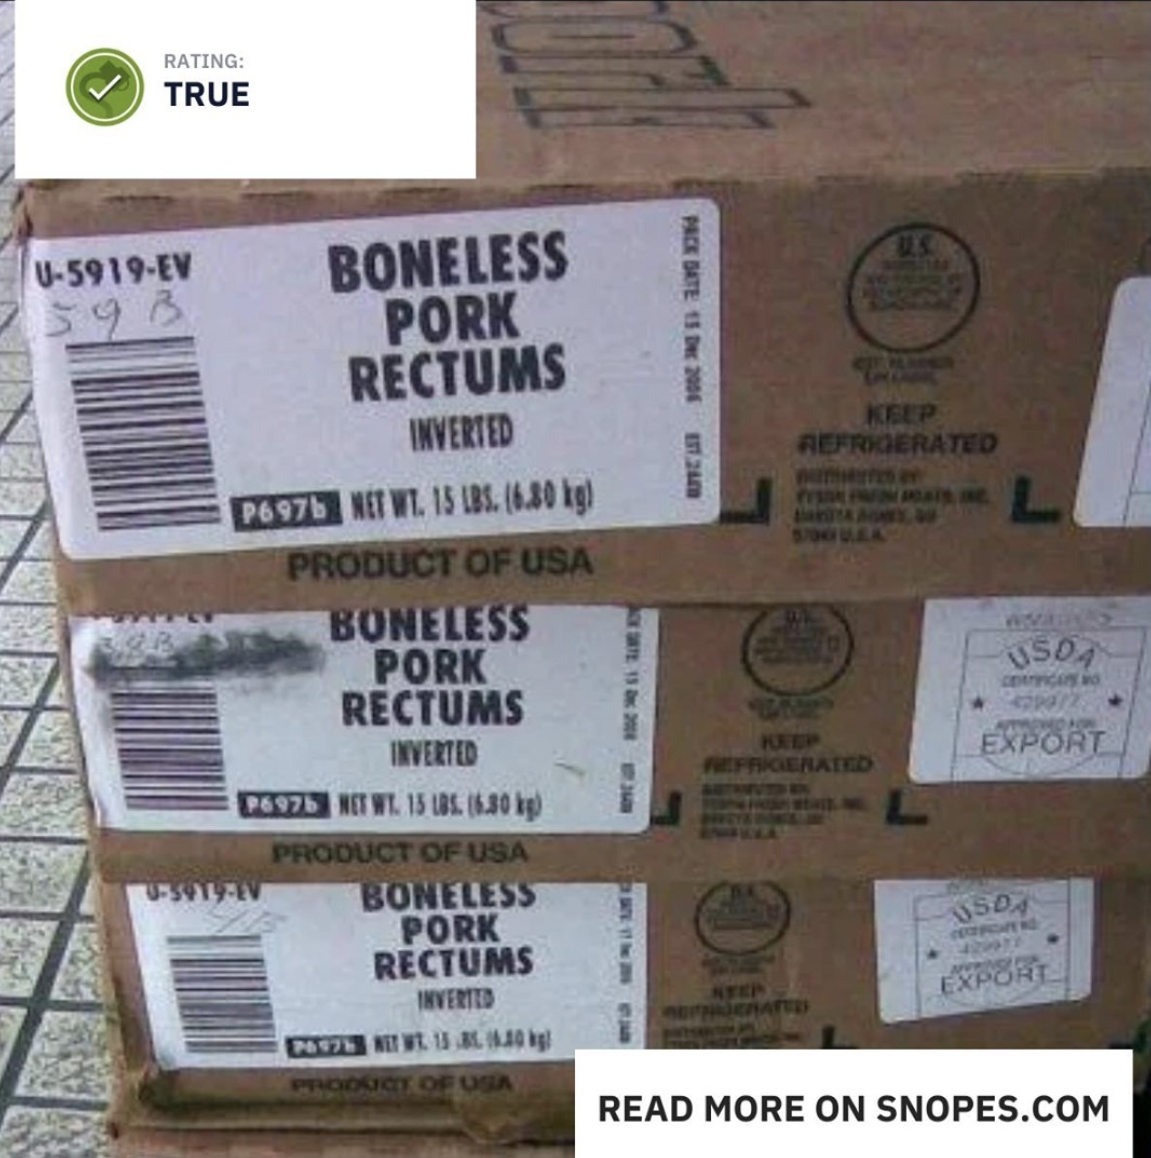 Snopes Facts - inverted pork rectums - Rating True U5919Ev Neste $98 I Boneless Pork Rectums Keep Inverted Refrigerated P6976 Netwl 15 Lbs. 15 L Product Of Usa Boneless Pork Usd Rectums Inverted Export 28973 Mtwt. 1531. 18.30 hp L Product Of Usa Boneless 